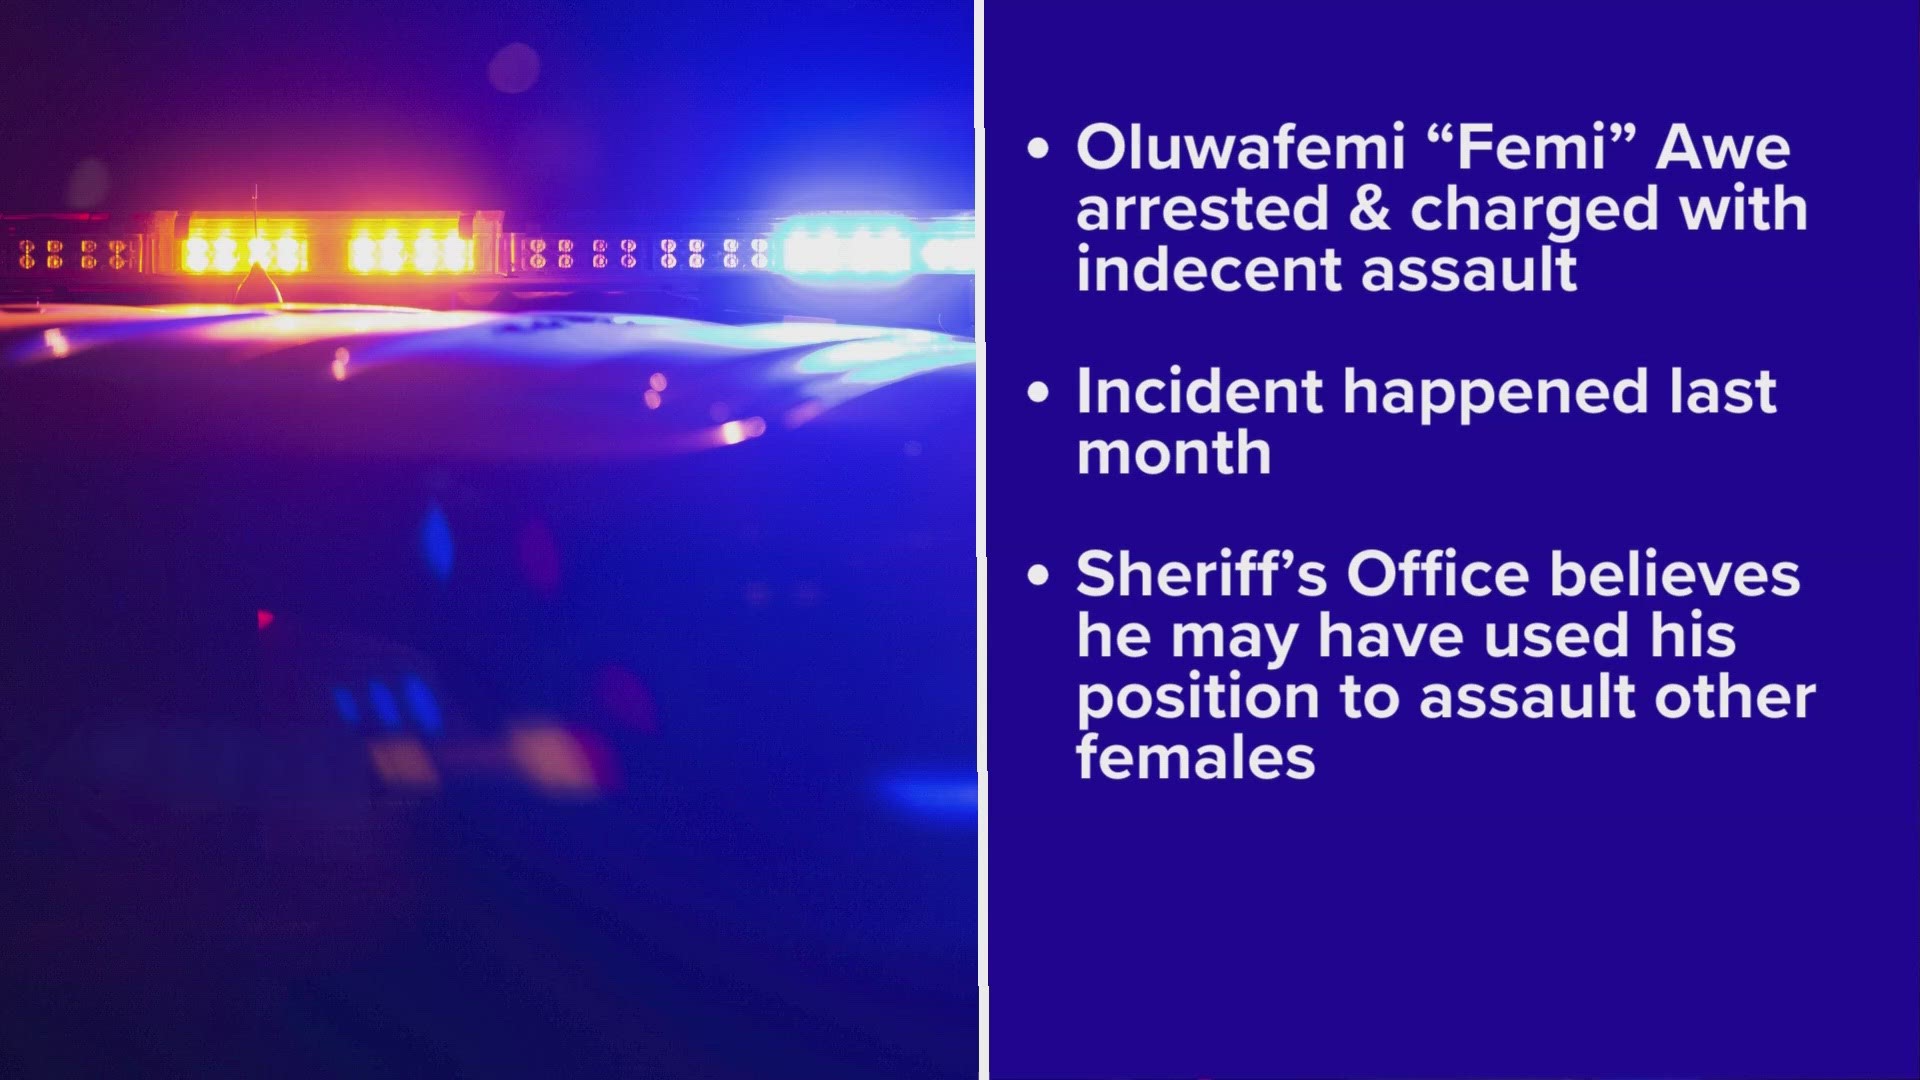 The charge against Oluwafemi “Femi” Awe, 31, was related to an incident Feb. 25, according to the Tarrant County Sheriff’s Office.